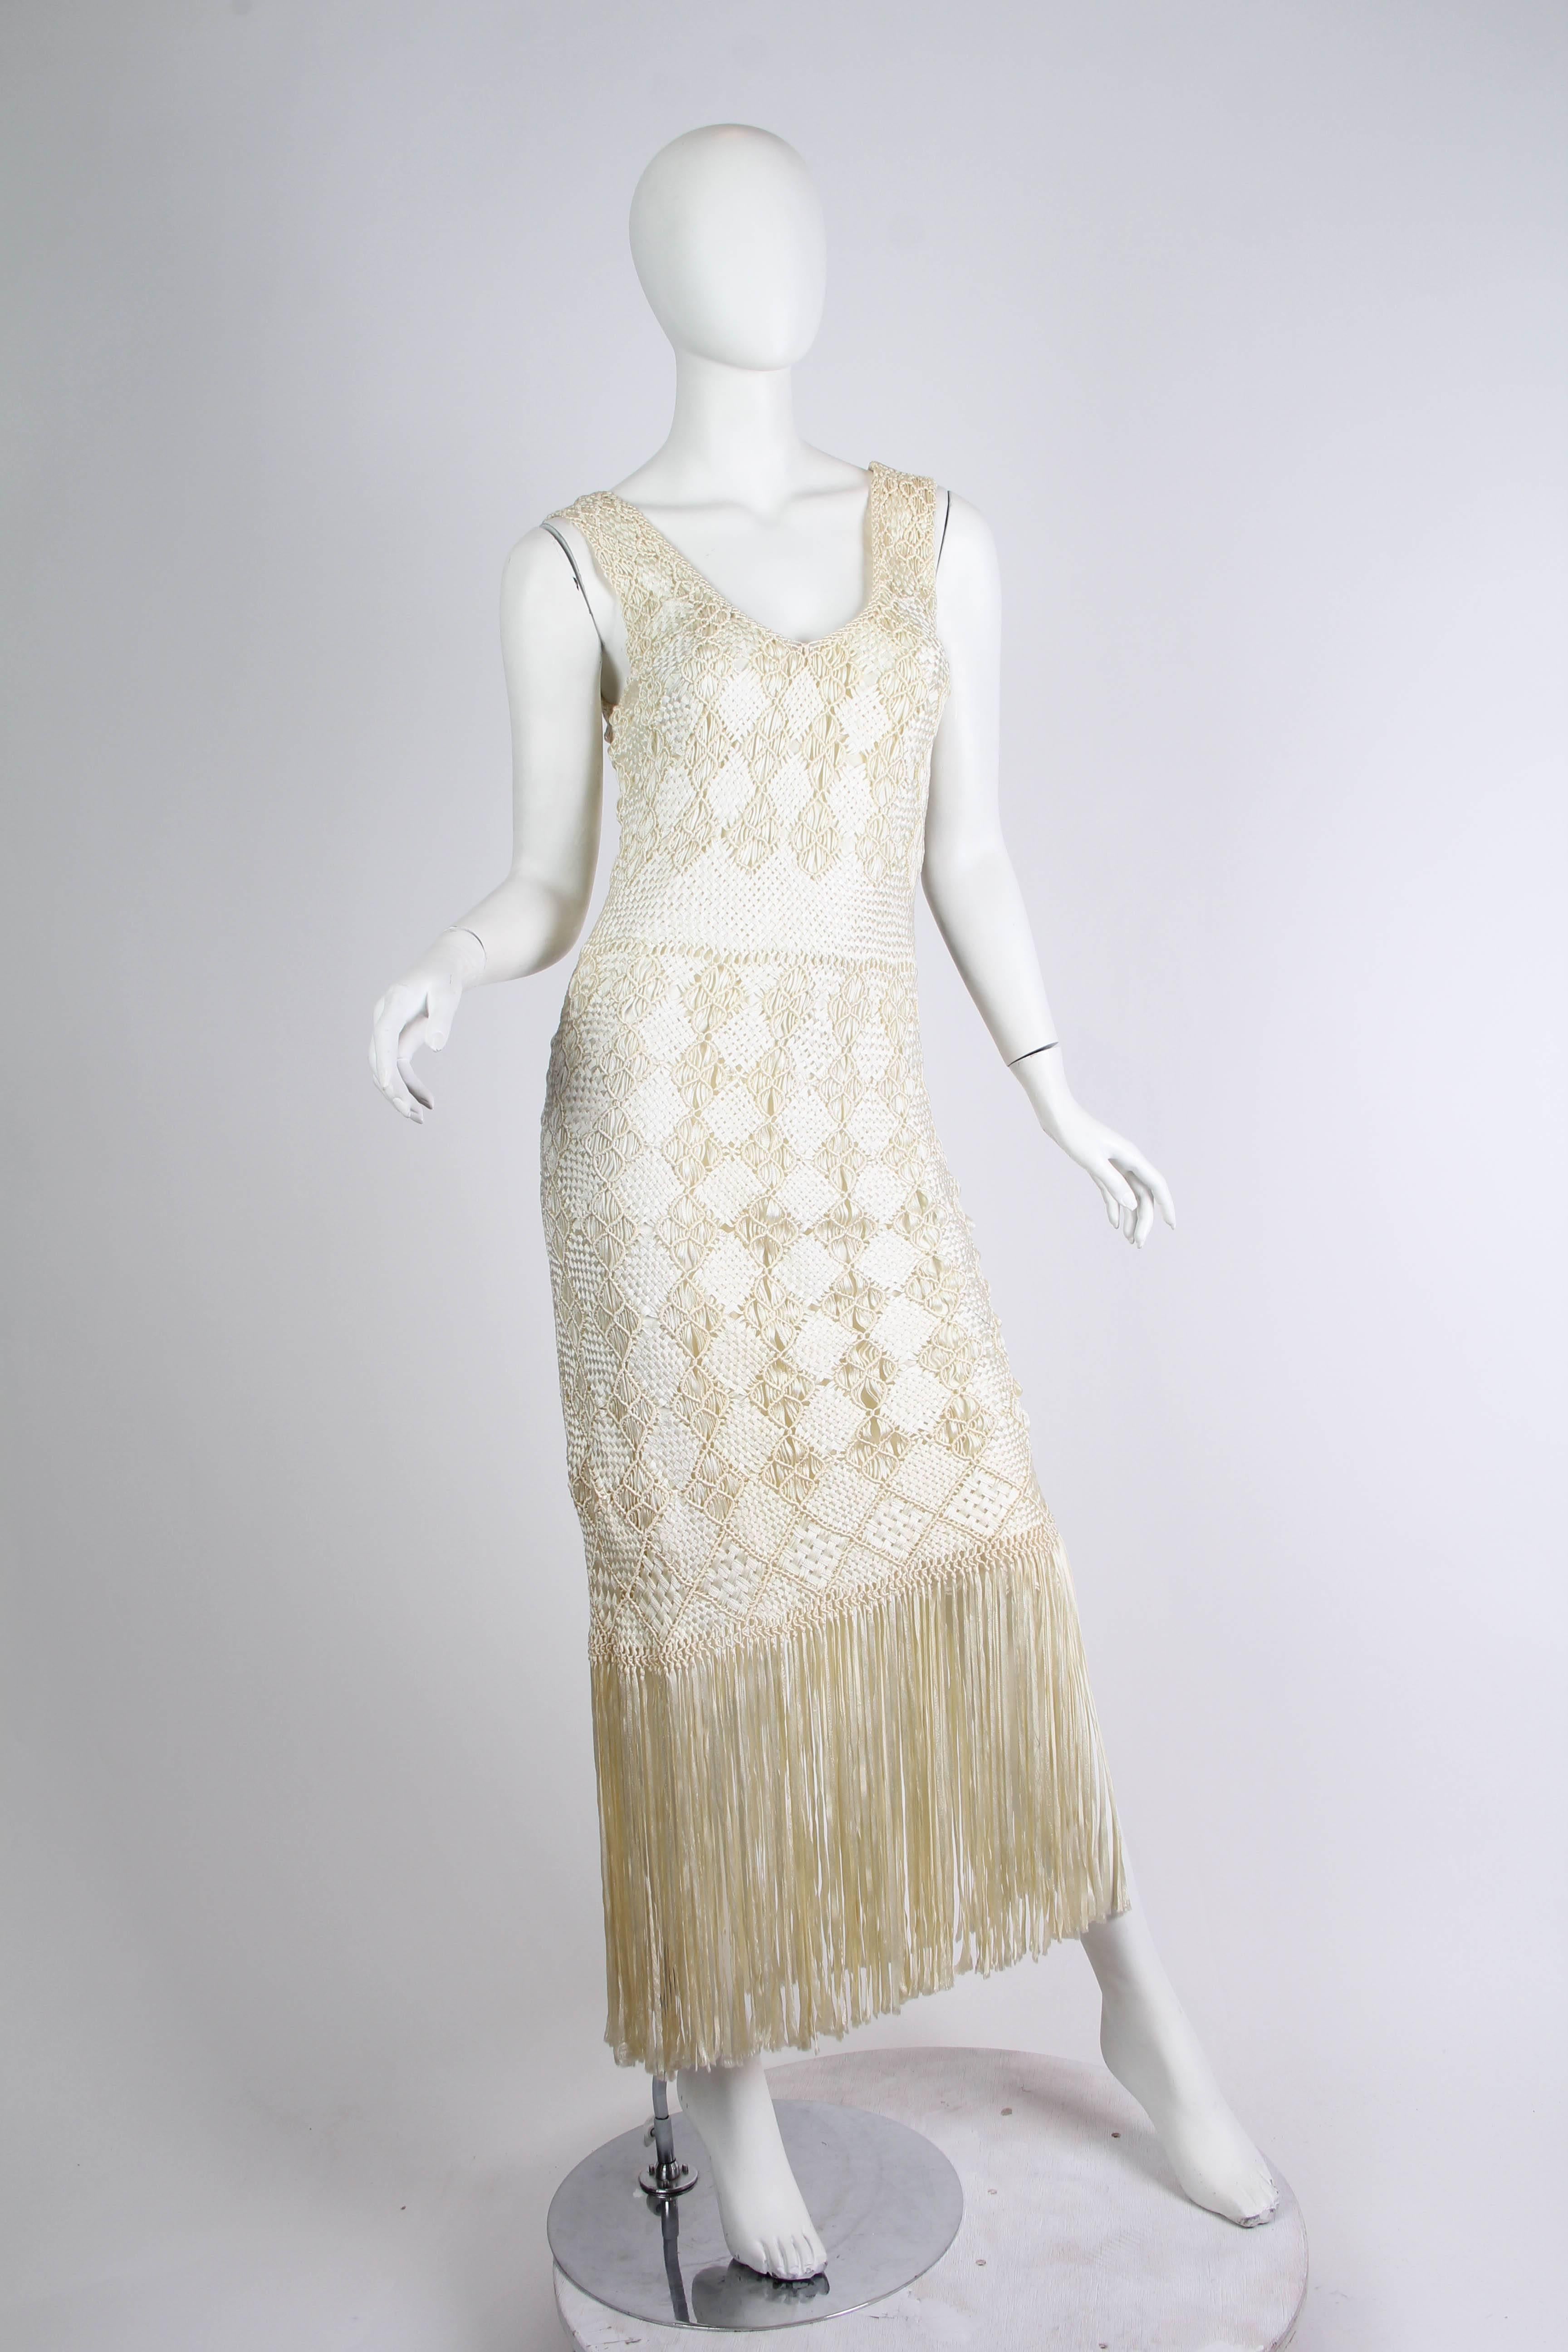 Women's 1970s Hand Knotted Ribbon Crochet Dress with Fringed Hem